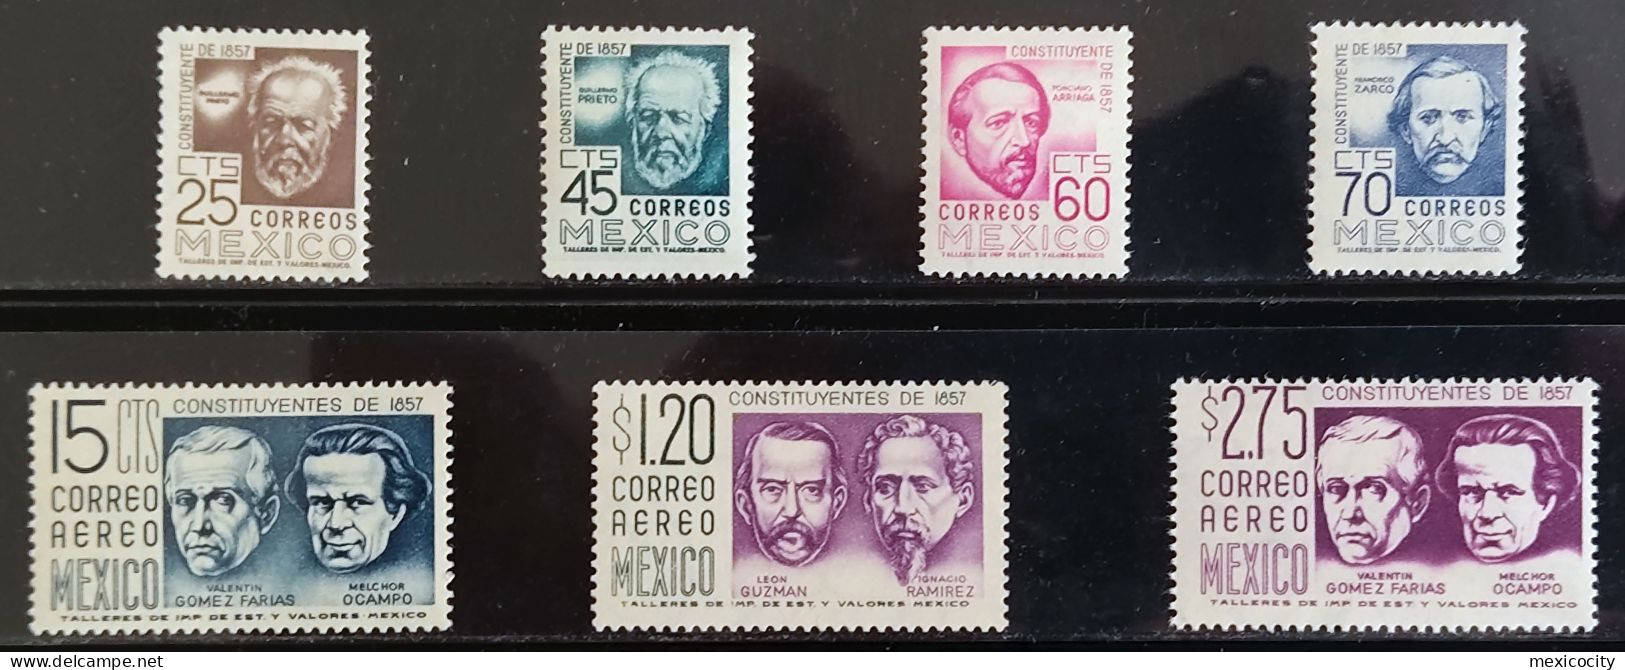 MEXICO 1957 - 1857 CONSTITUTION Centy. Set Scott 897A-900 & C236-C237A Mint Unmounted MNH, Nice & Rather Scarce Set Thus - Messico